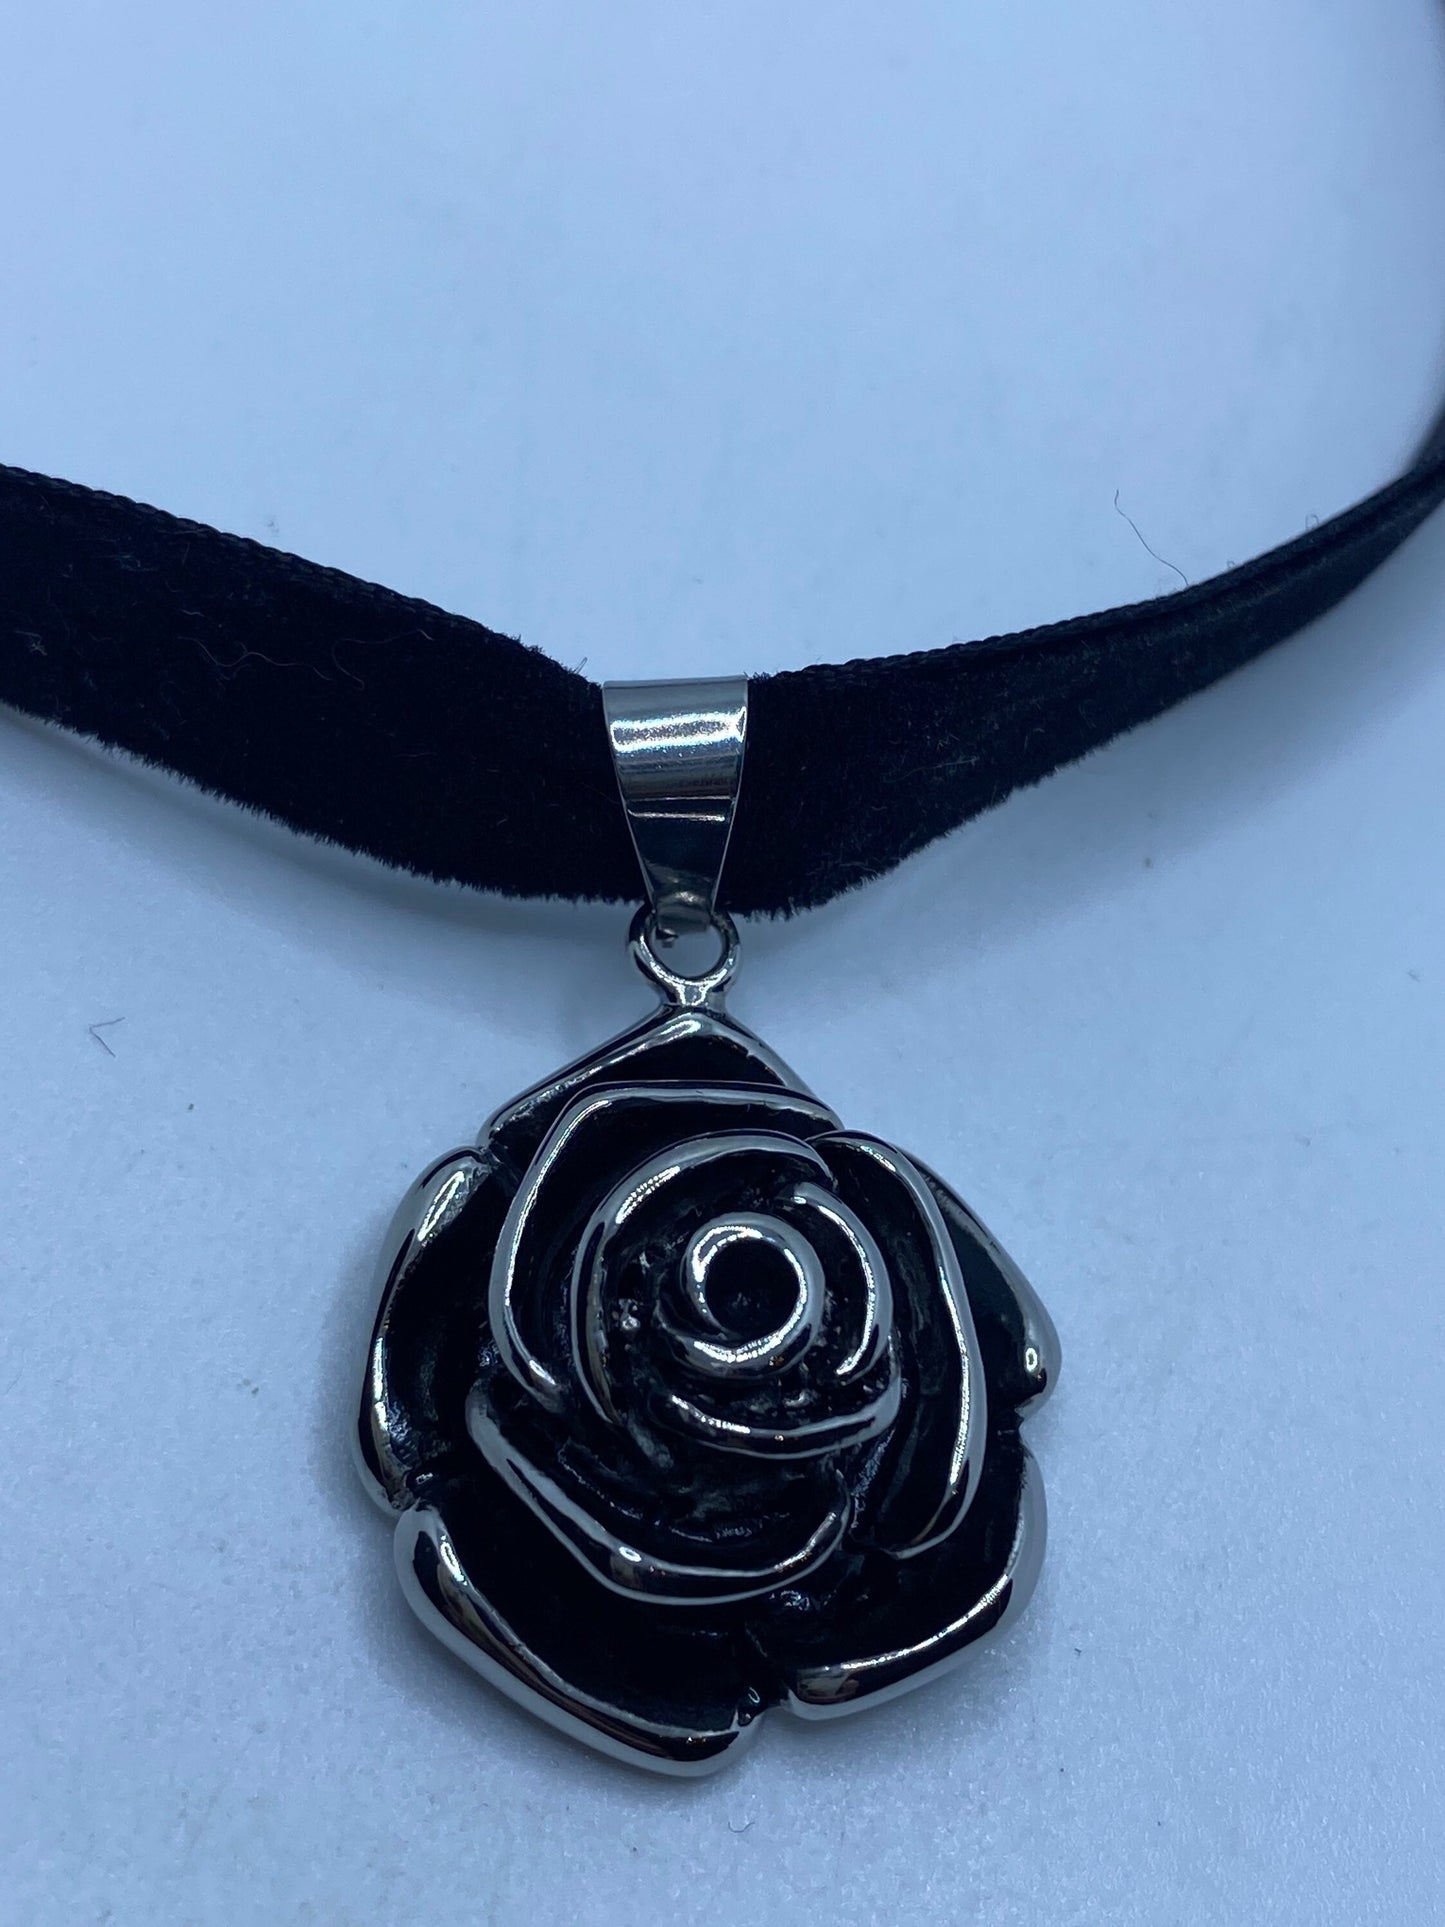 Vintage Rose Choker Silver Stainless Steel Pendant Necklace